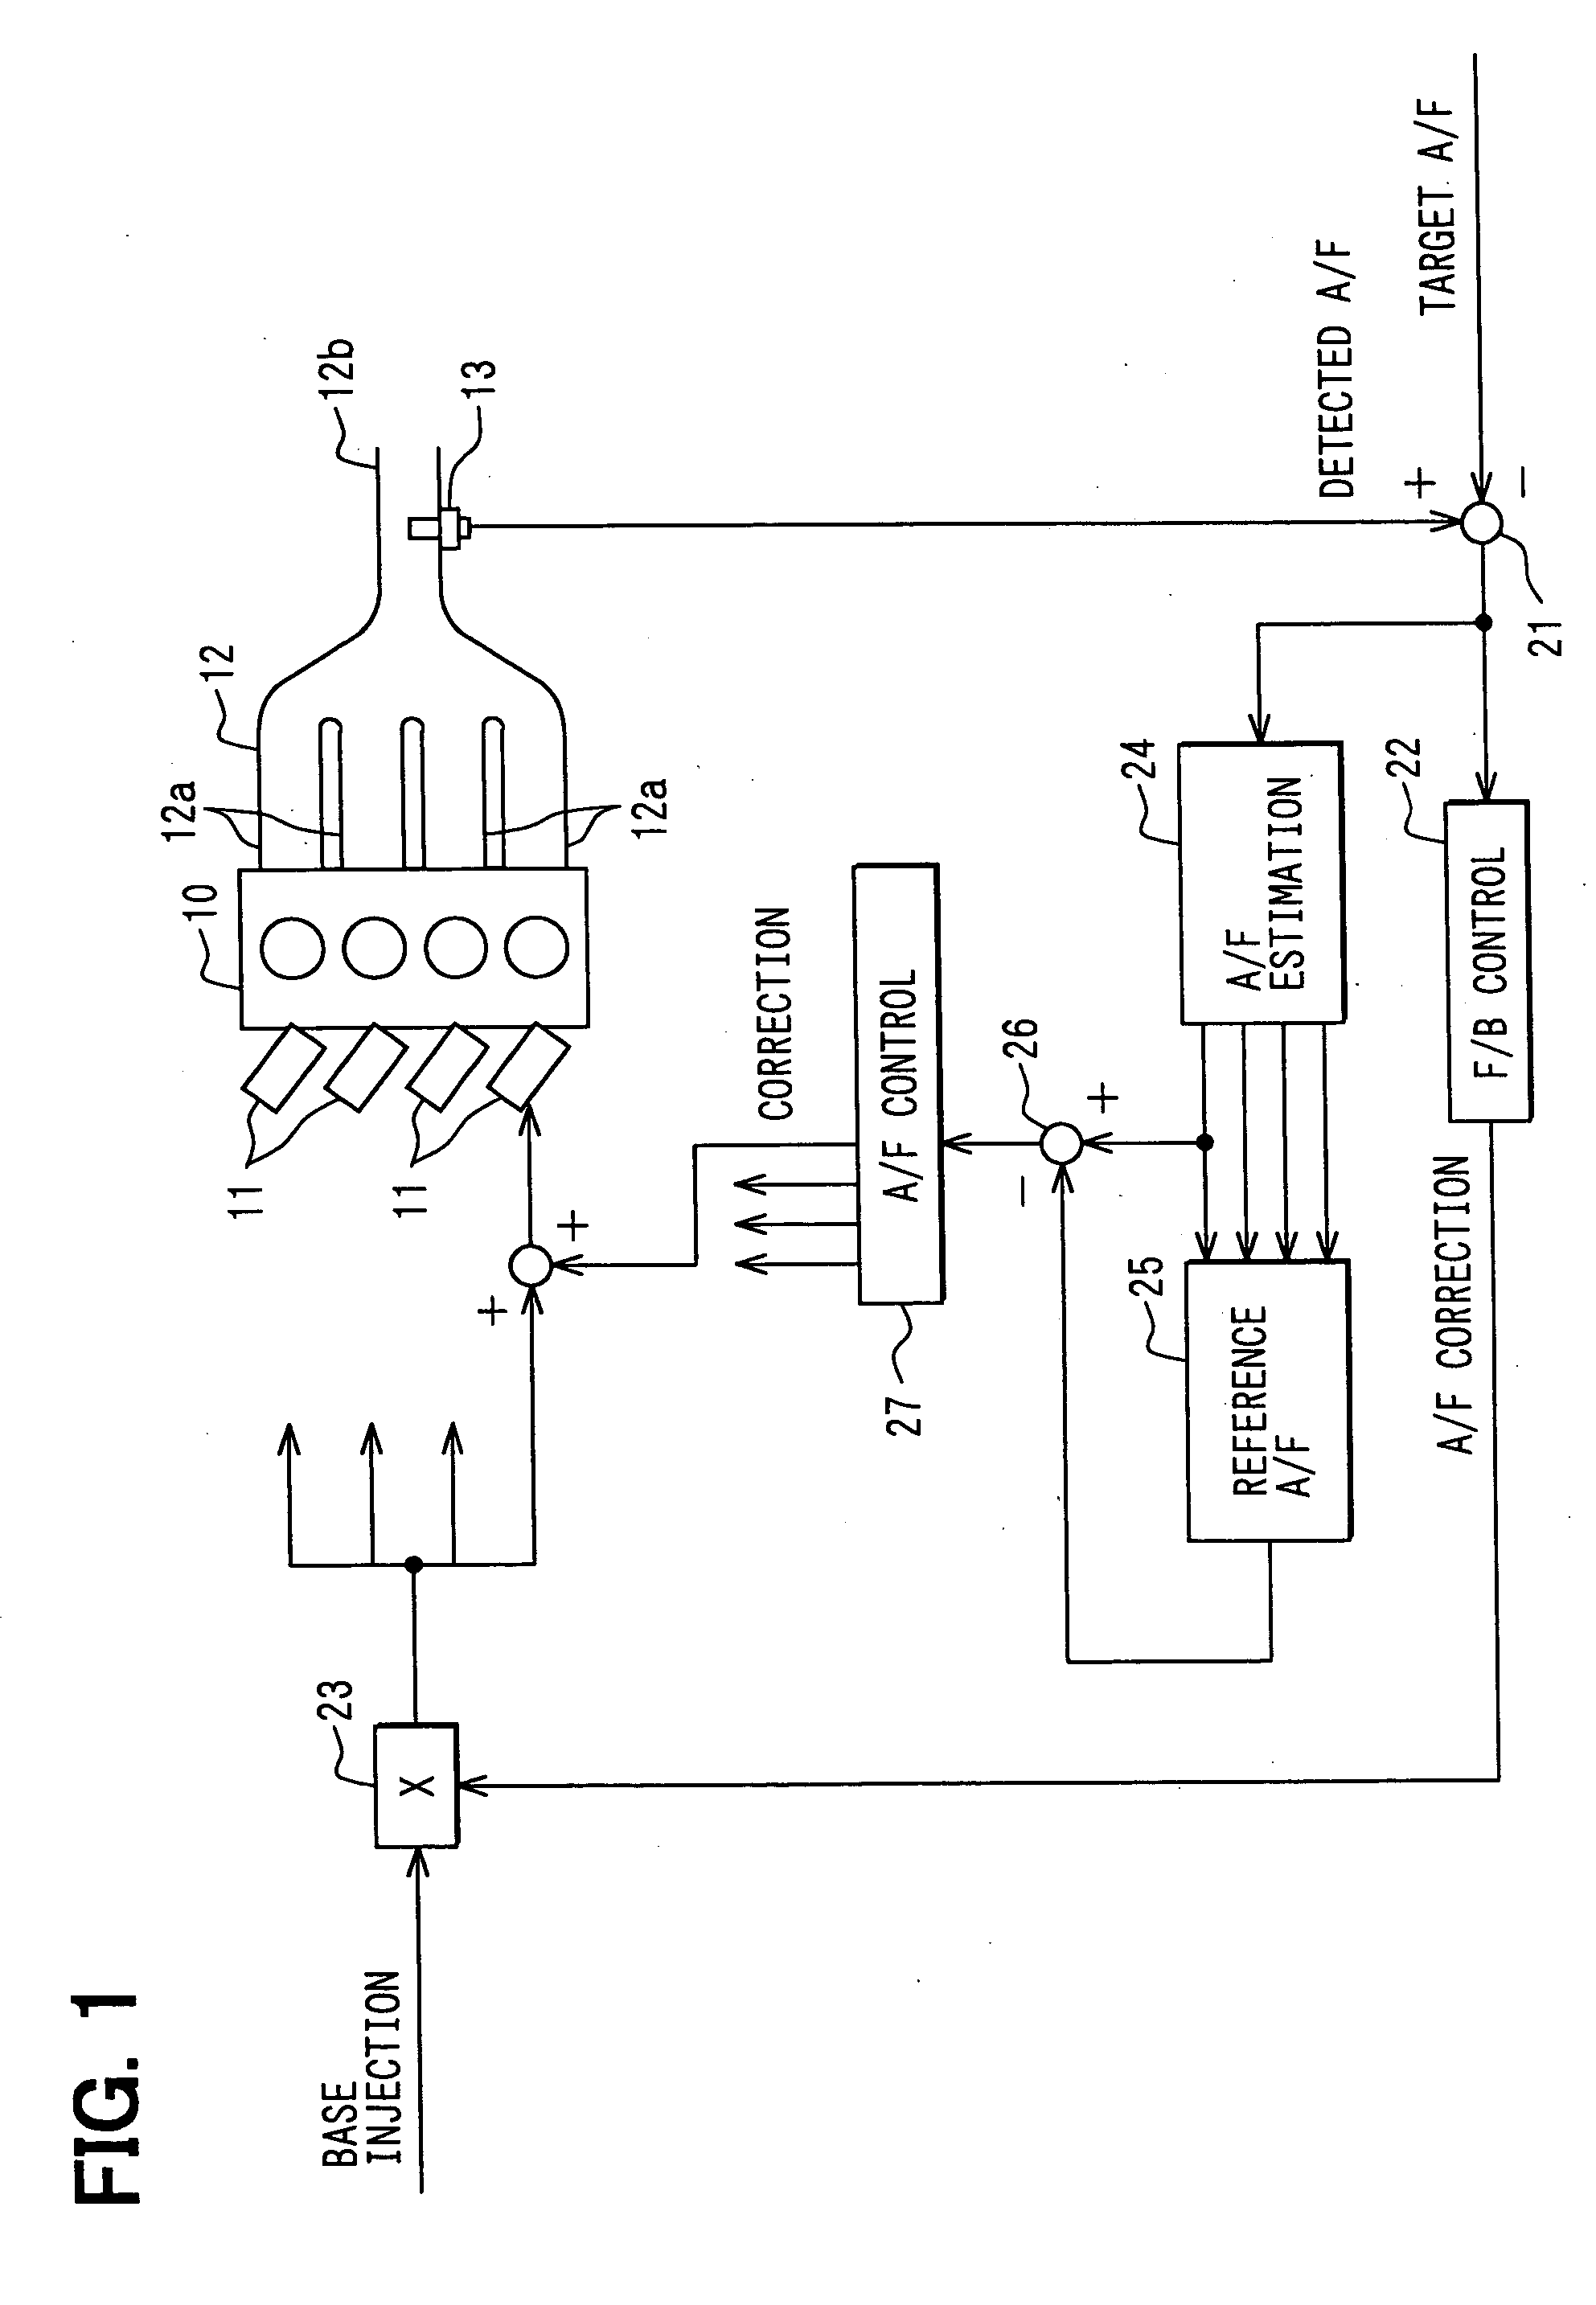 Cylinder-by-cylinder air-fuel ratio calculation apparatus for multi-cylinder internal combustion engine